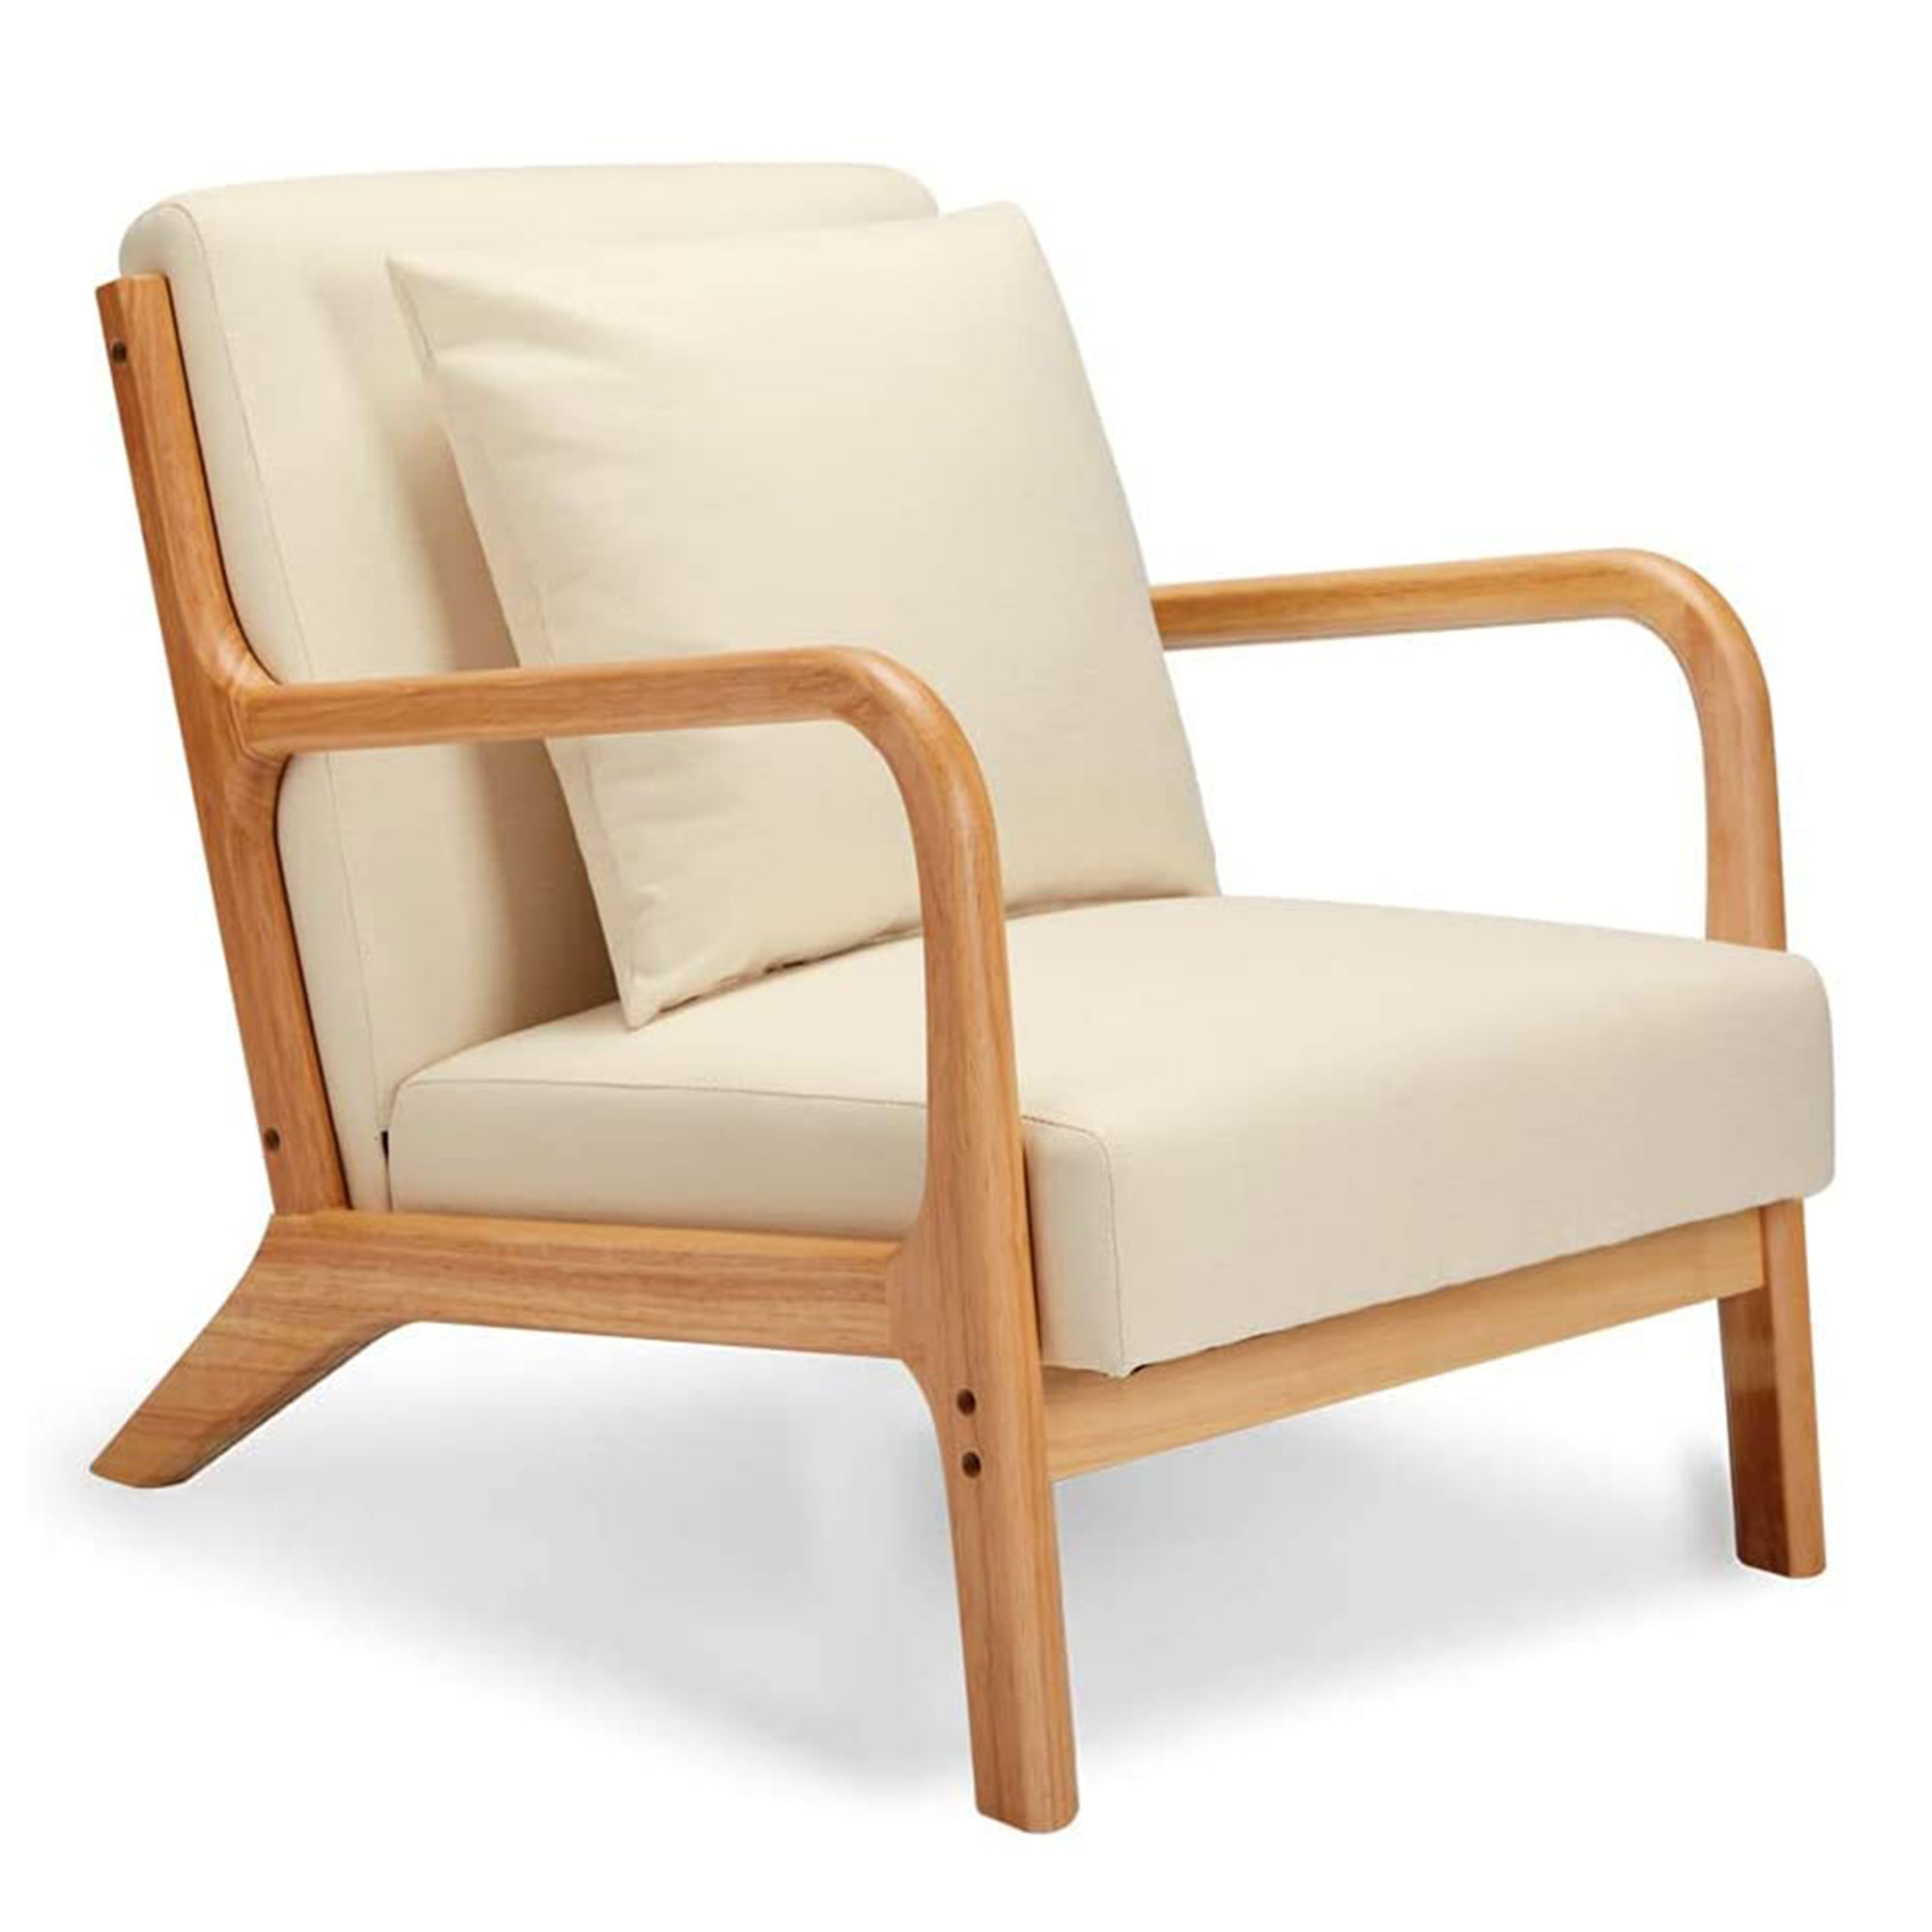 Jomeed Oak Wood Frame Mid Century Modern Accent Chair for Living Room - image 1 of 6